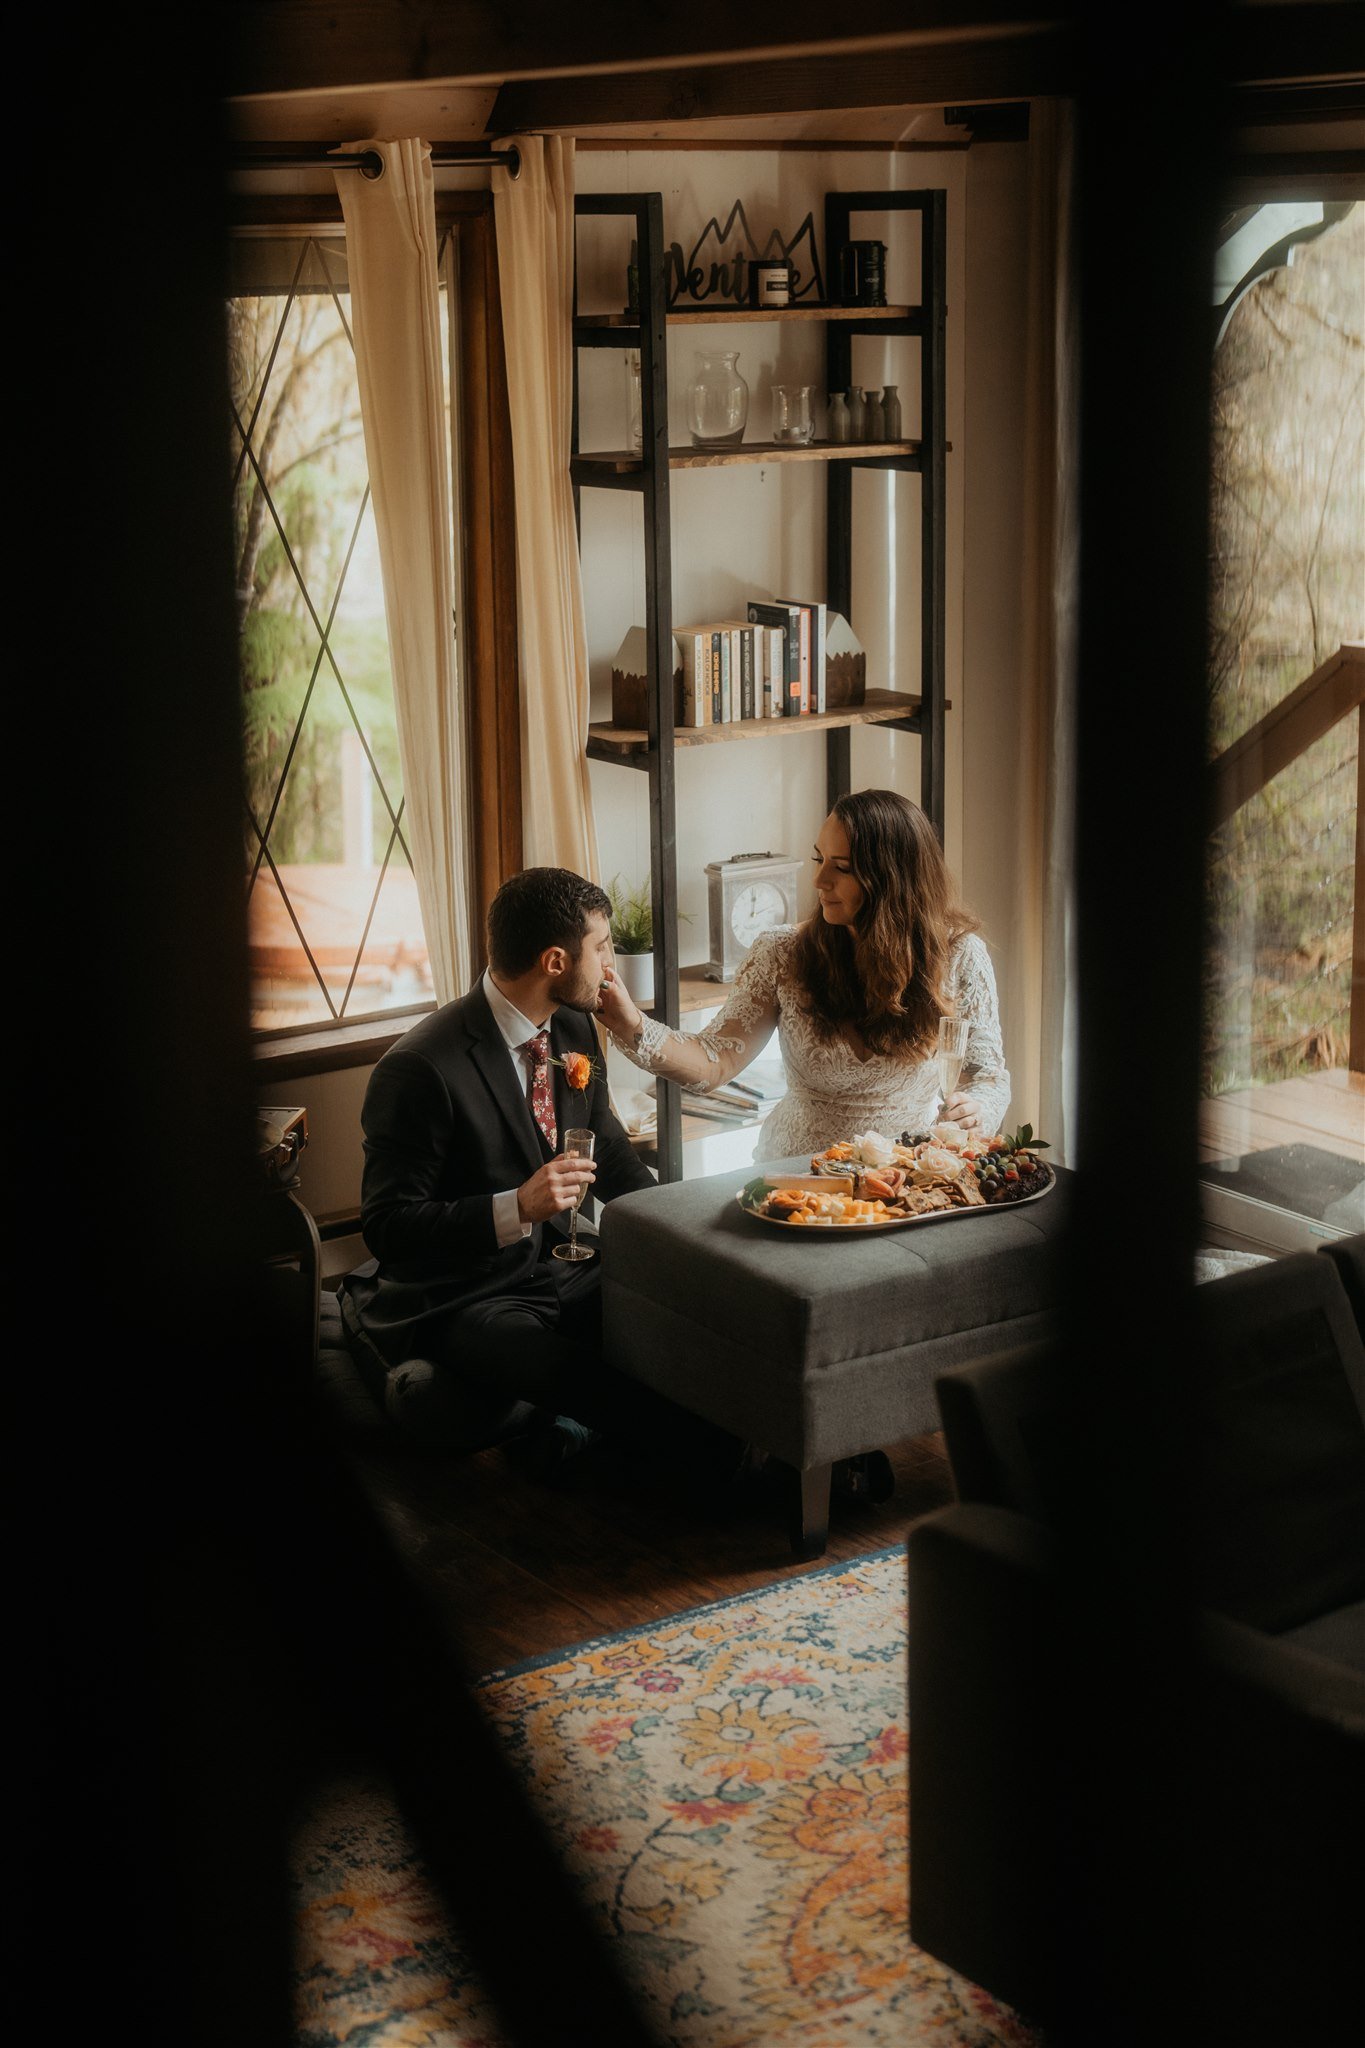 Bride and groom sit on the floor eating a cheese board after their snowy mountain elopement in Washington